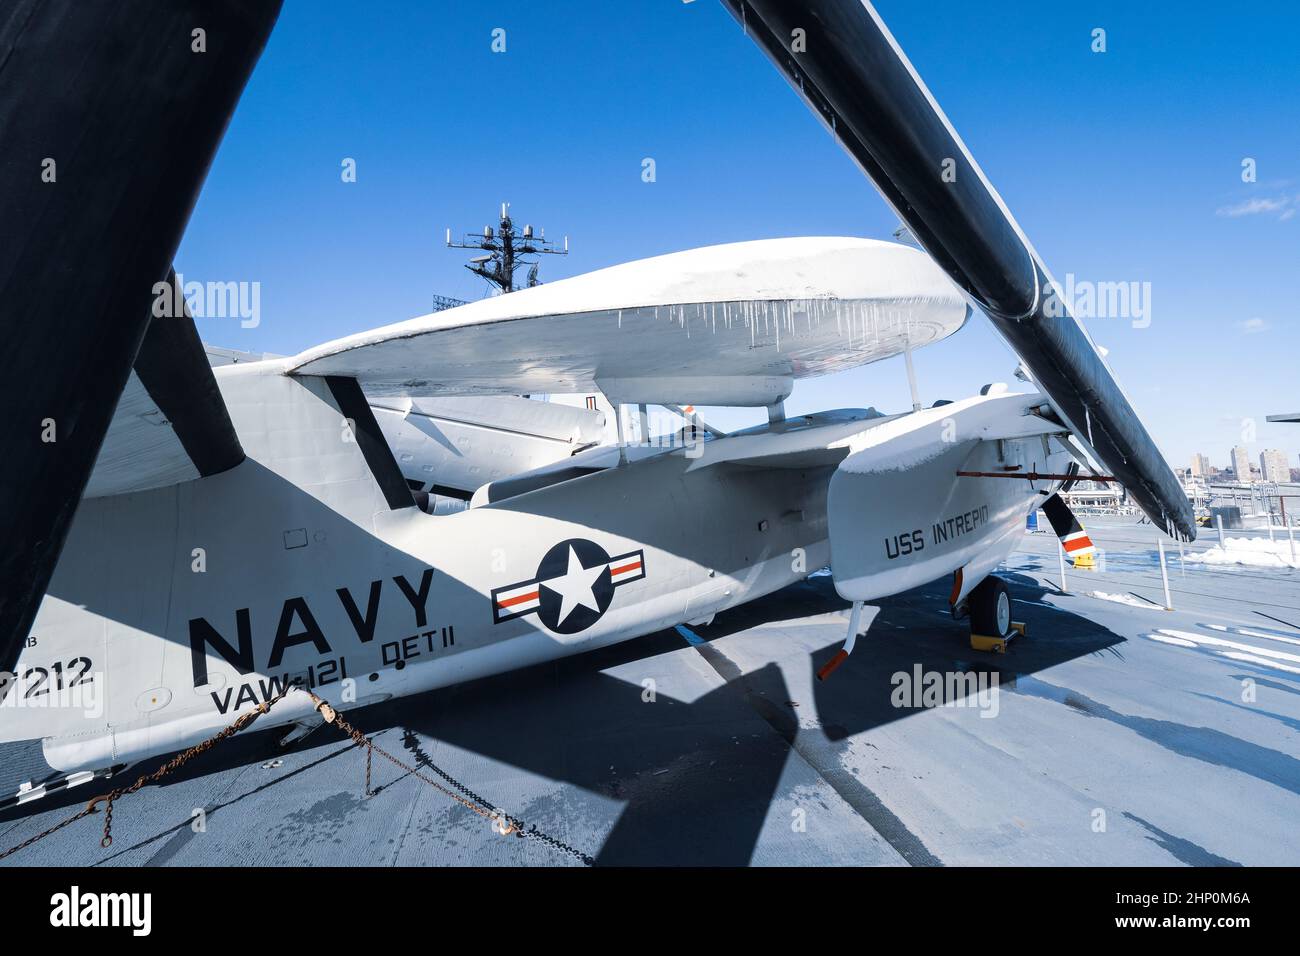 View of a Grumman E-1 Tracer parked on the flight deck of the aircraft carrier USS Intrepid, Intrepid Sea, Air and Space Museum, New York, NY, USA Stock Photo